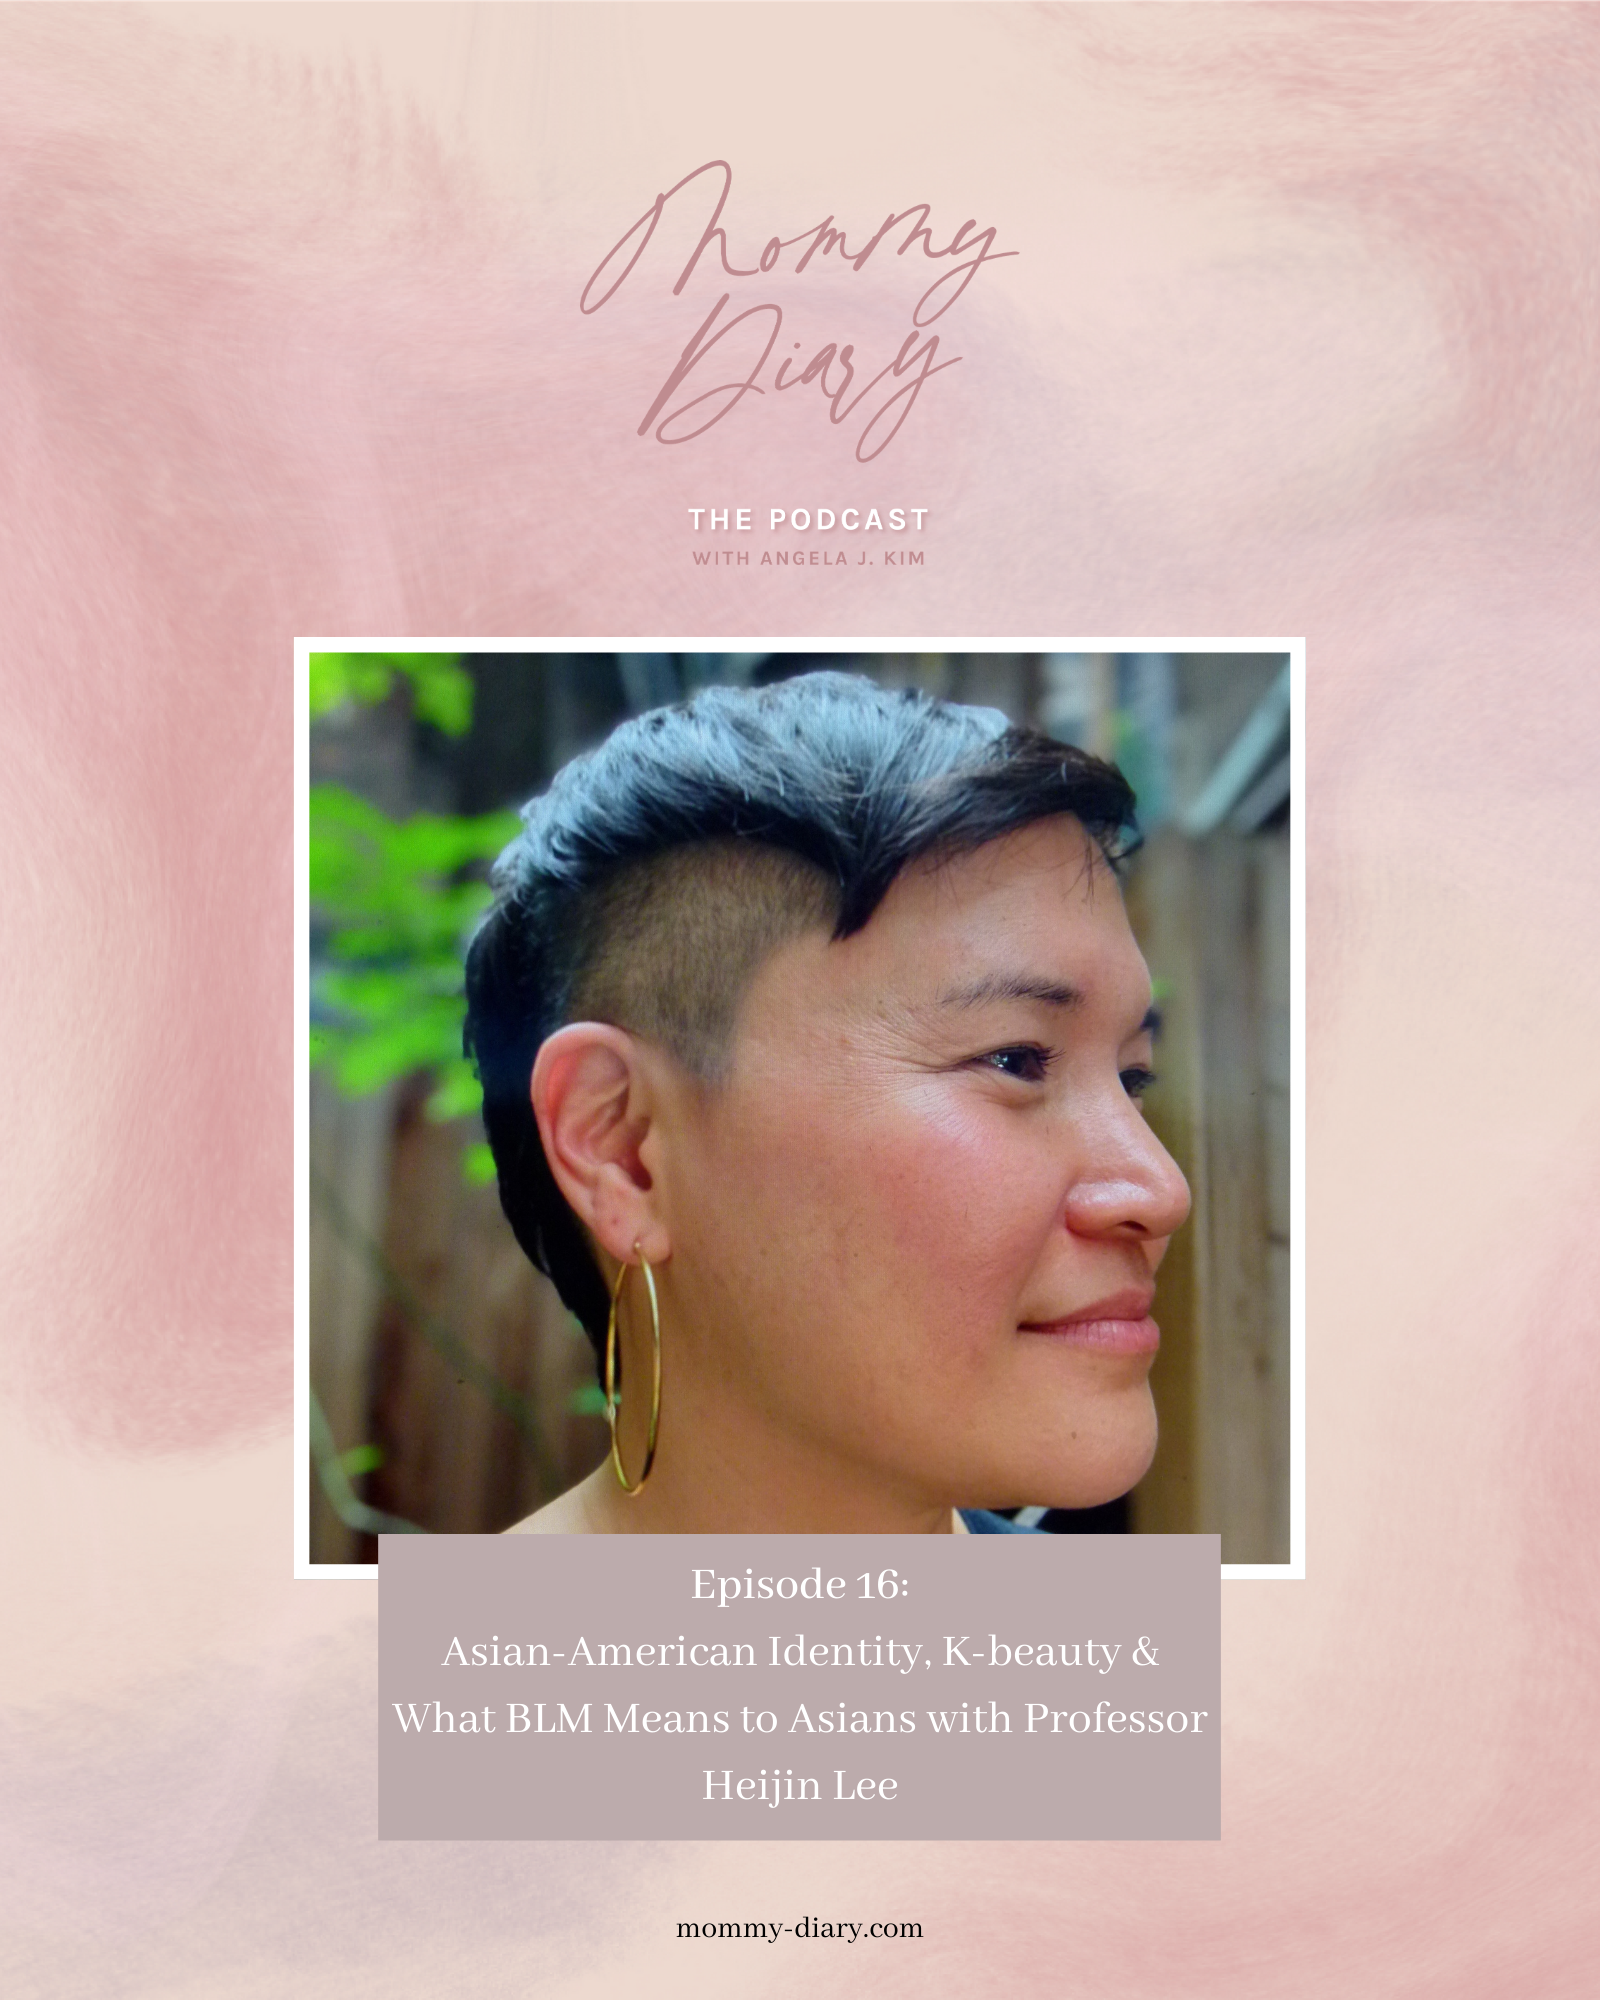 Ep 16: Asian-American Identity, K-beauty & What BLM Means to Asians with Professor Heijin Lee - Mommy Diary; Click here to learn about Asian-American identity & k-beauty on Mommy Diary! Being Asian-Americans, Heijin and I have similar experiences. Learn about k beauty makeup products, k beauty skin care products and k beauty products Korean skincare. K beauty skin care skincare routine is important in Korea. We also discuss black lives matter on this podcast episode. Learn about asian culture life and Korean pop culture aesthetic specifically as well on this episode.